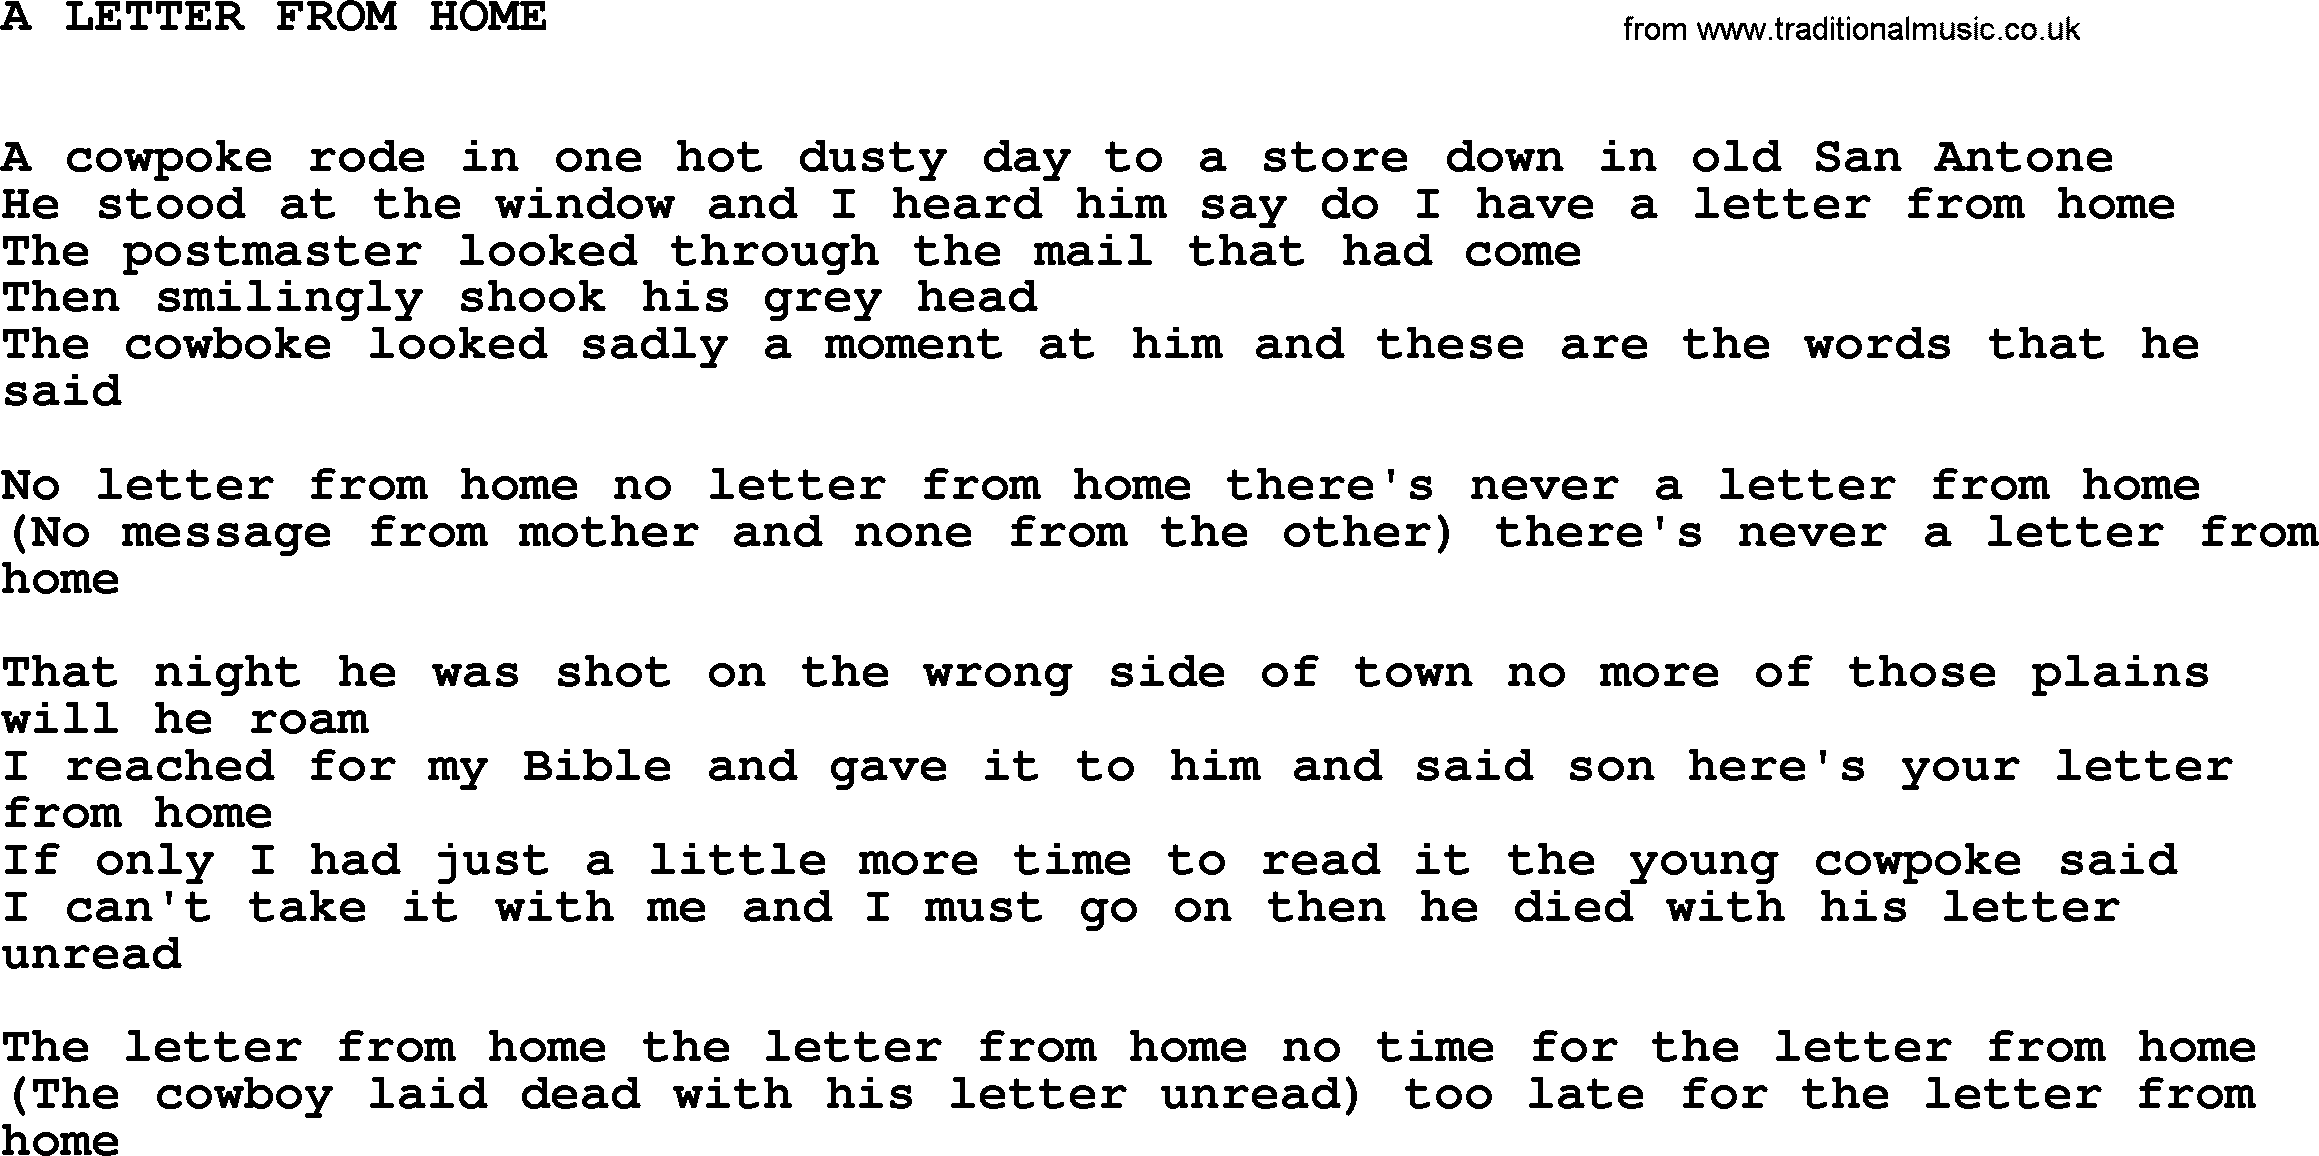 Johnny Cash song A Letter From Home.txt lyrics